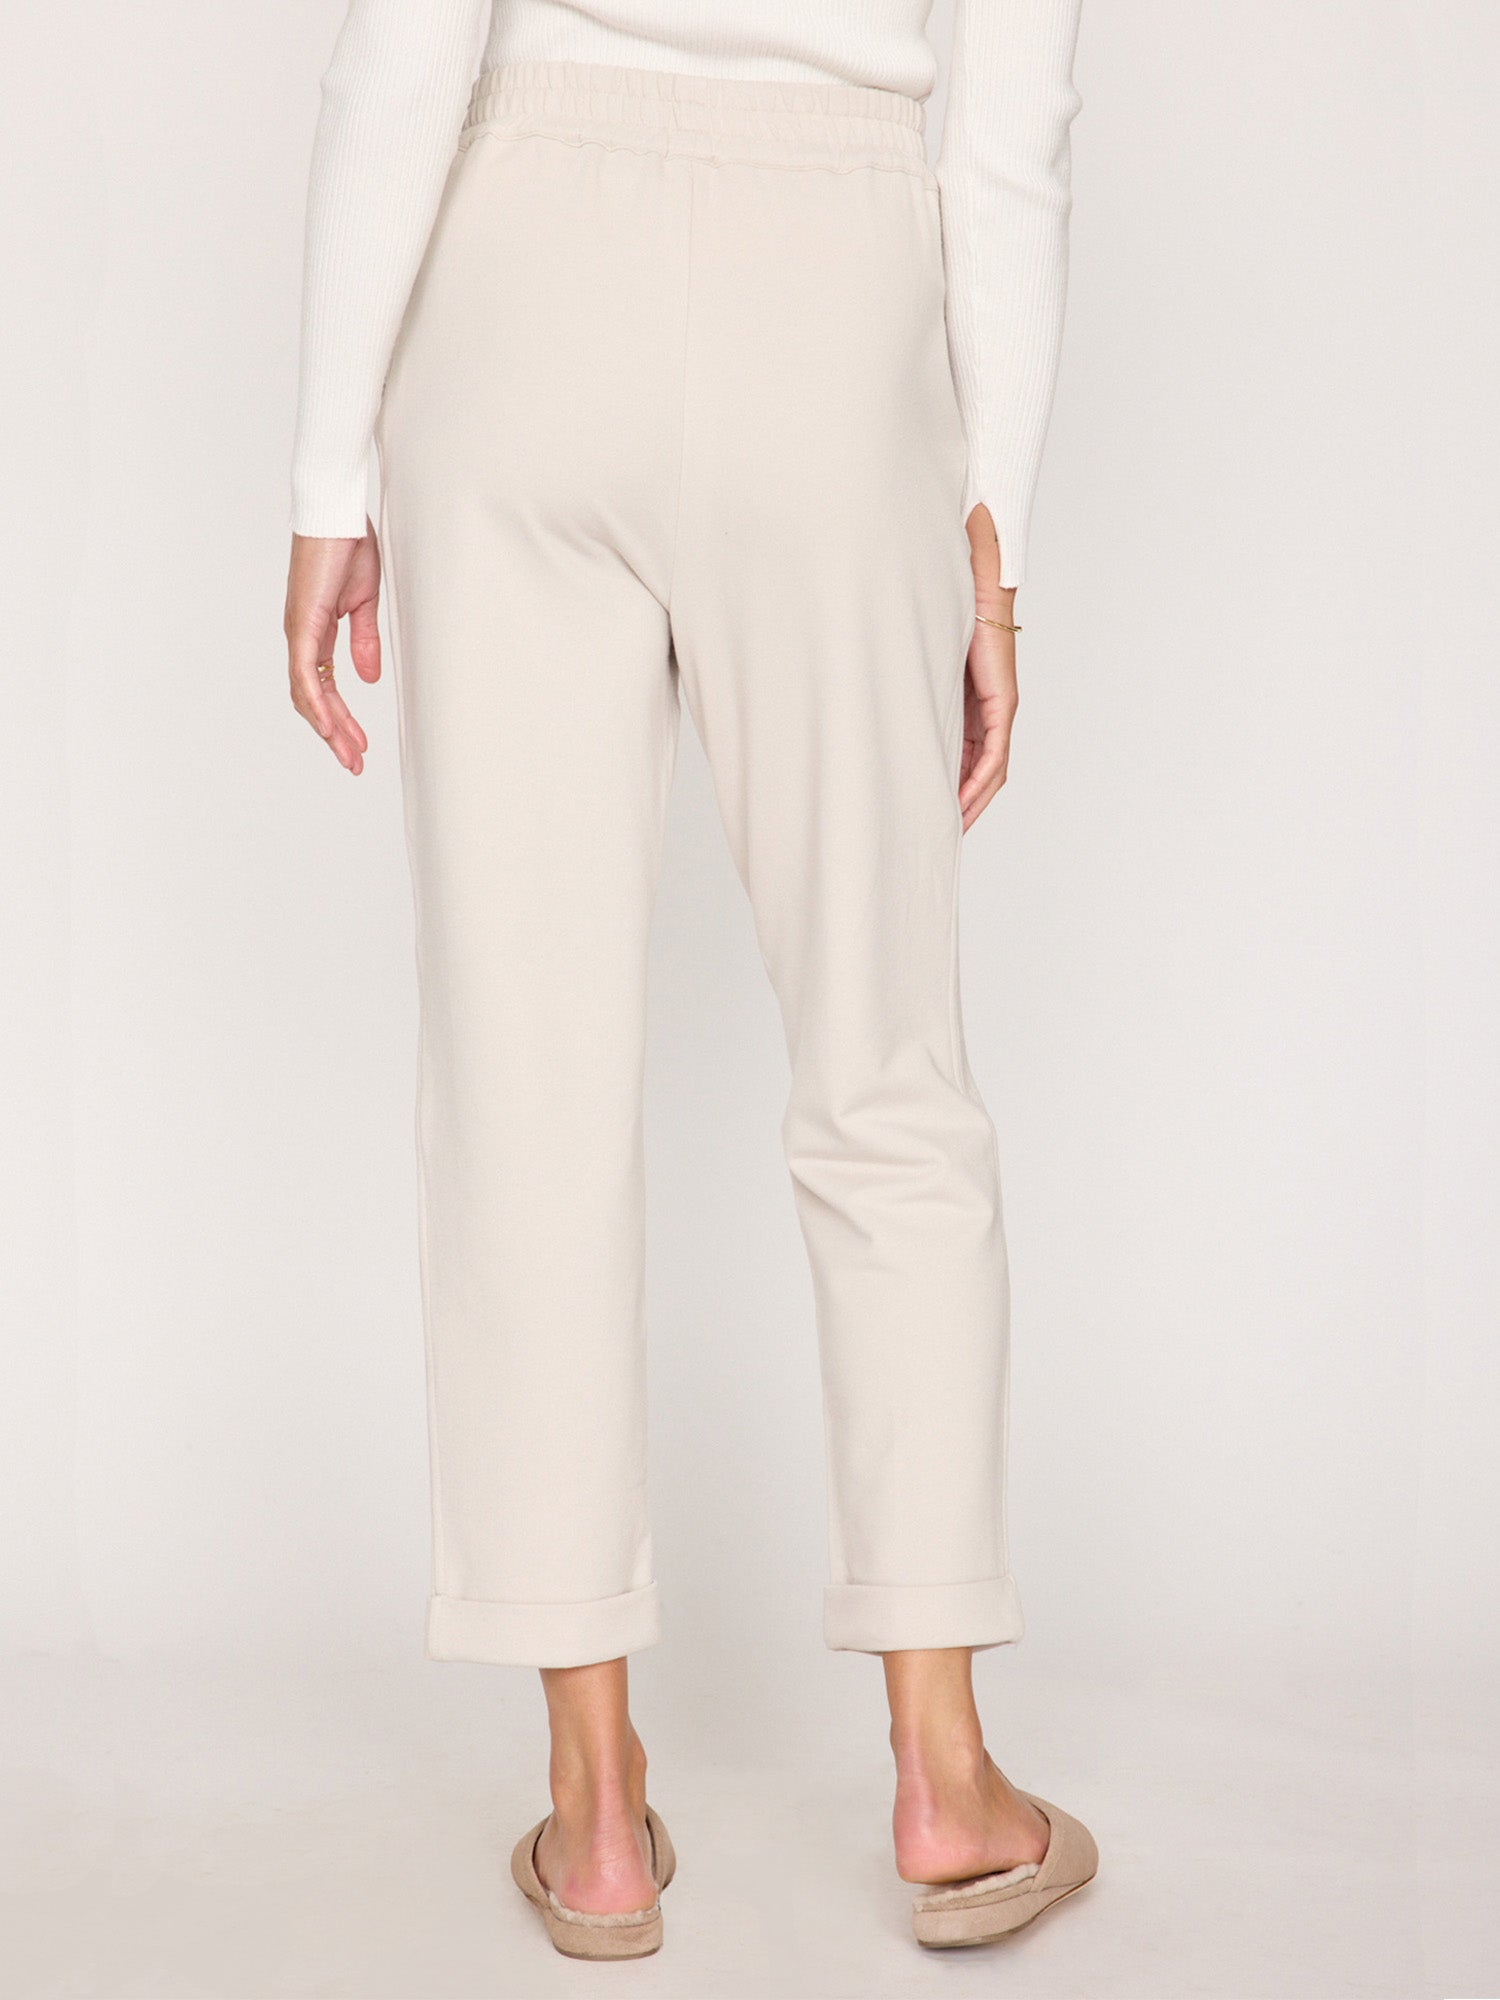 Penn Terry off-white jogger ankle pant back view